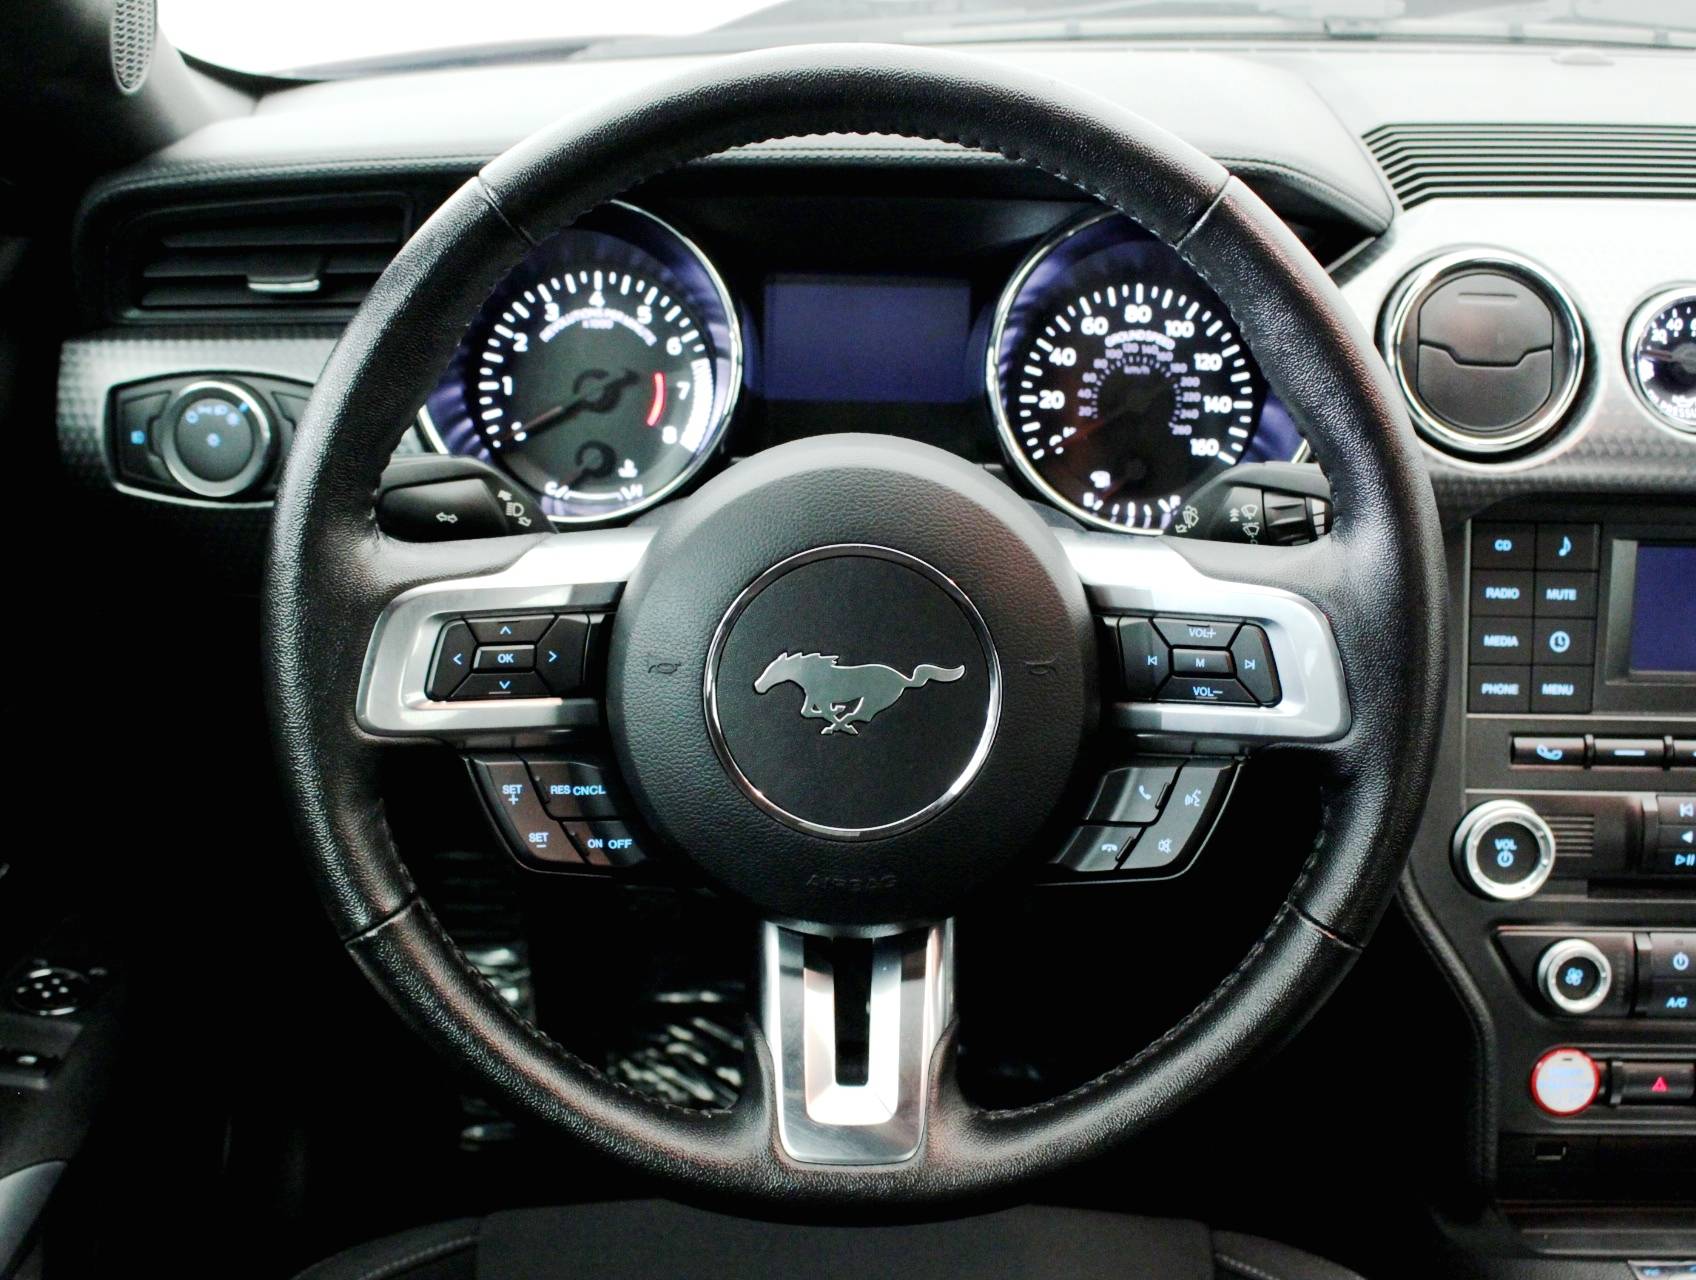 Florida Fine Cars - Used FORD MUSTANG 2017 HOLLYWOOD Gt Performance Pkg